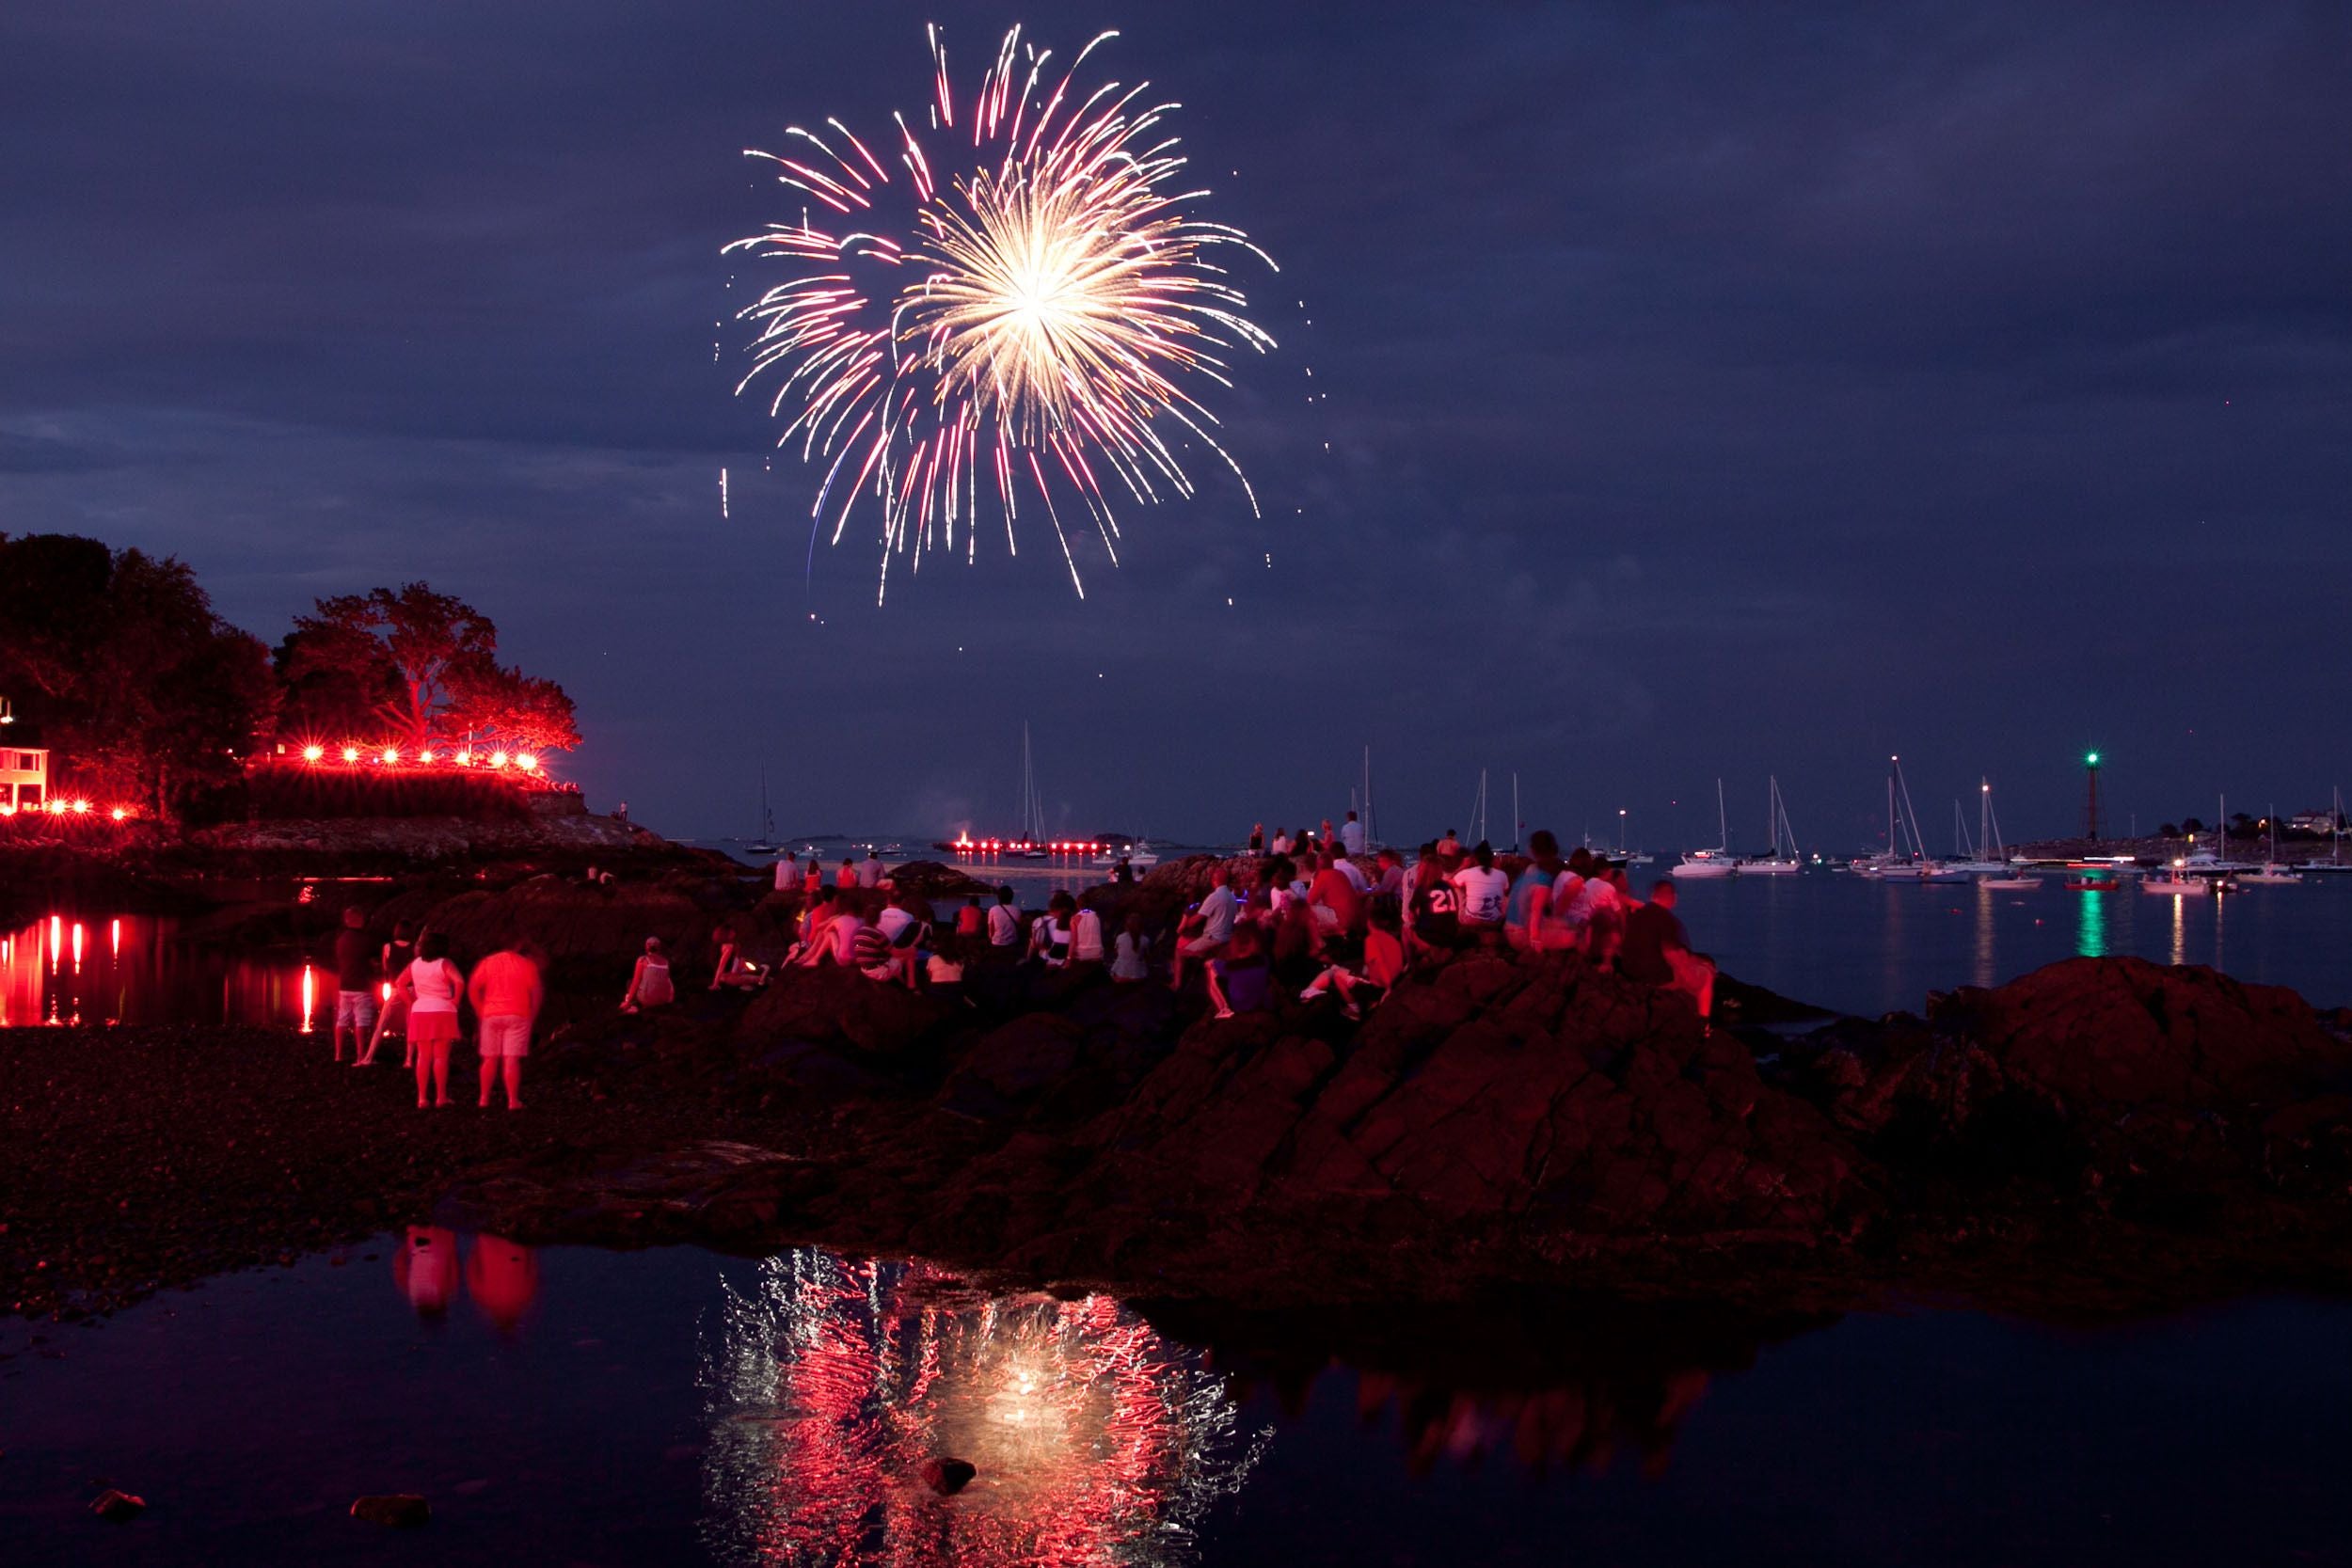 Crowds watch the 2010 Marblehead Fireworks during low tide.